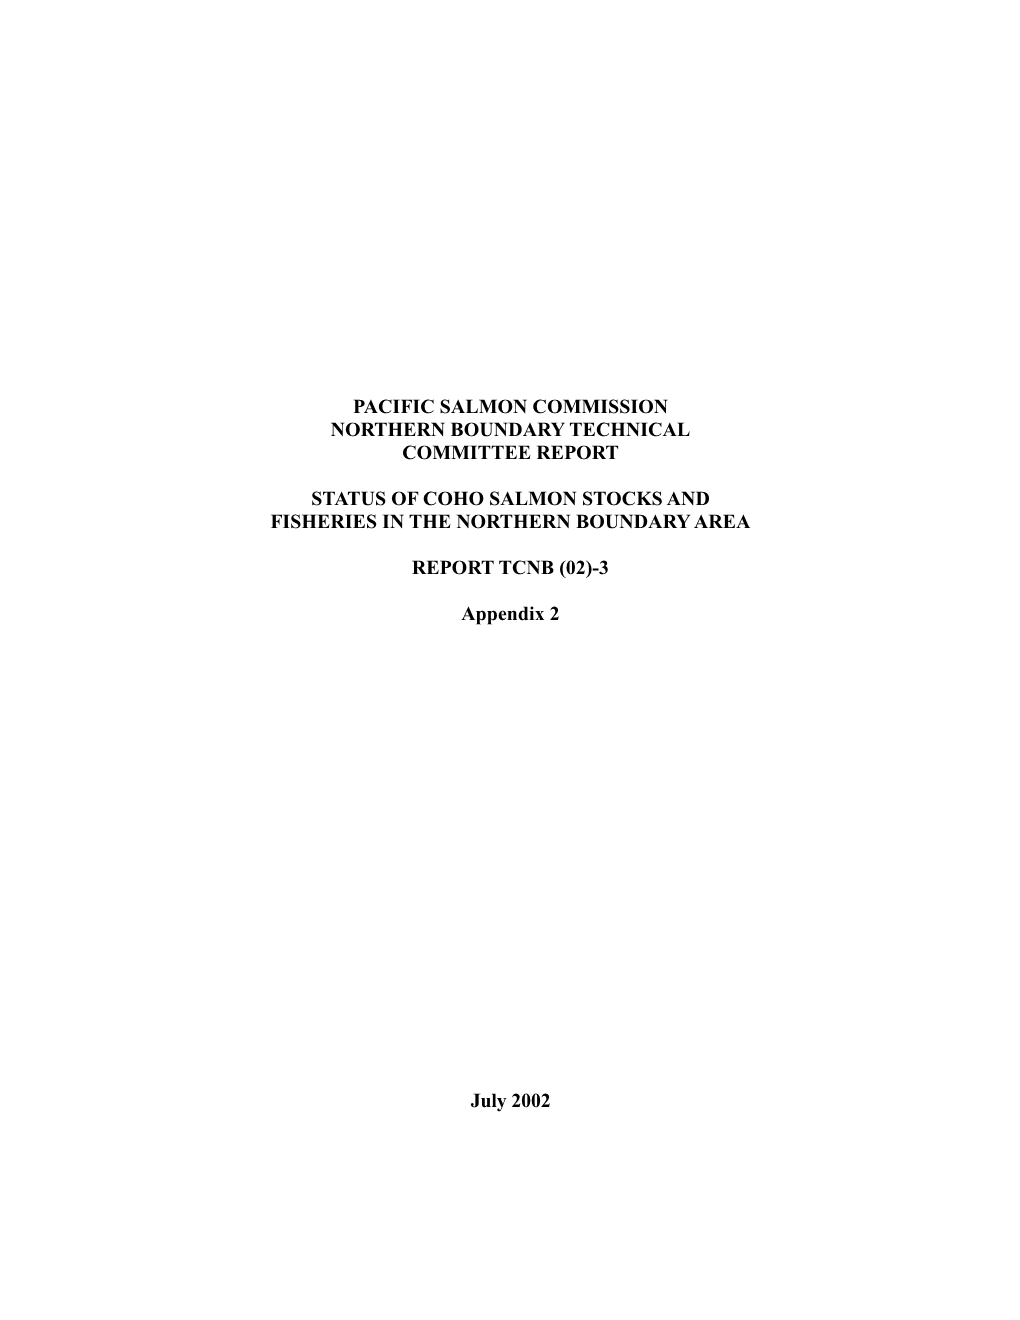 Pacific Salmon Commission Northern Boundary Technical Committee Report